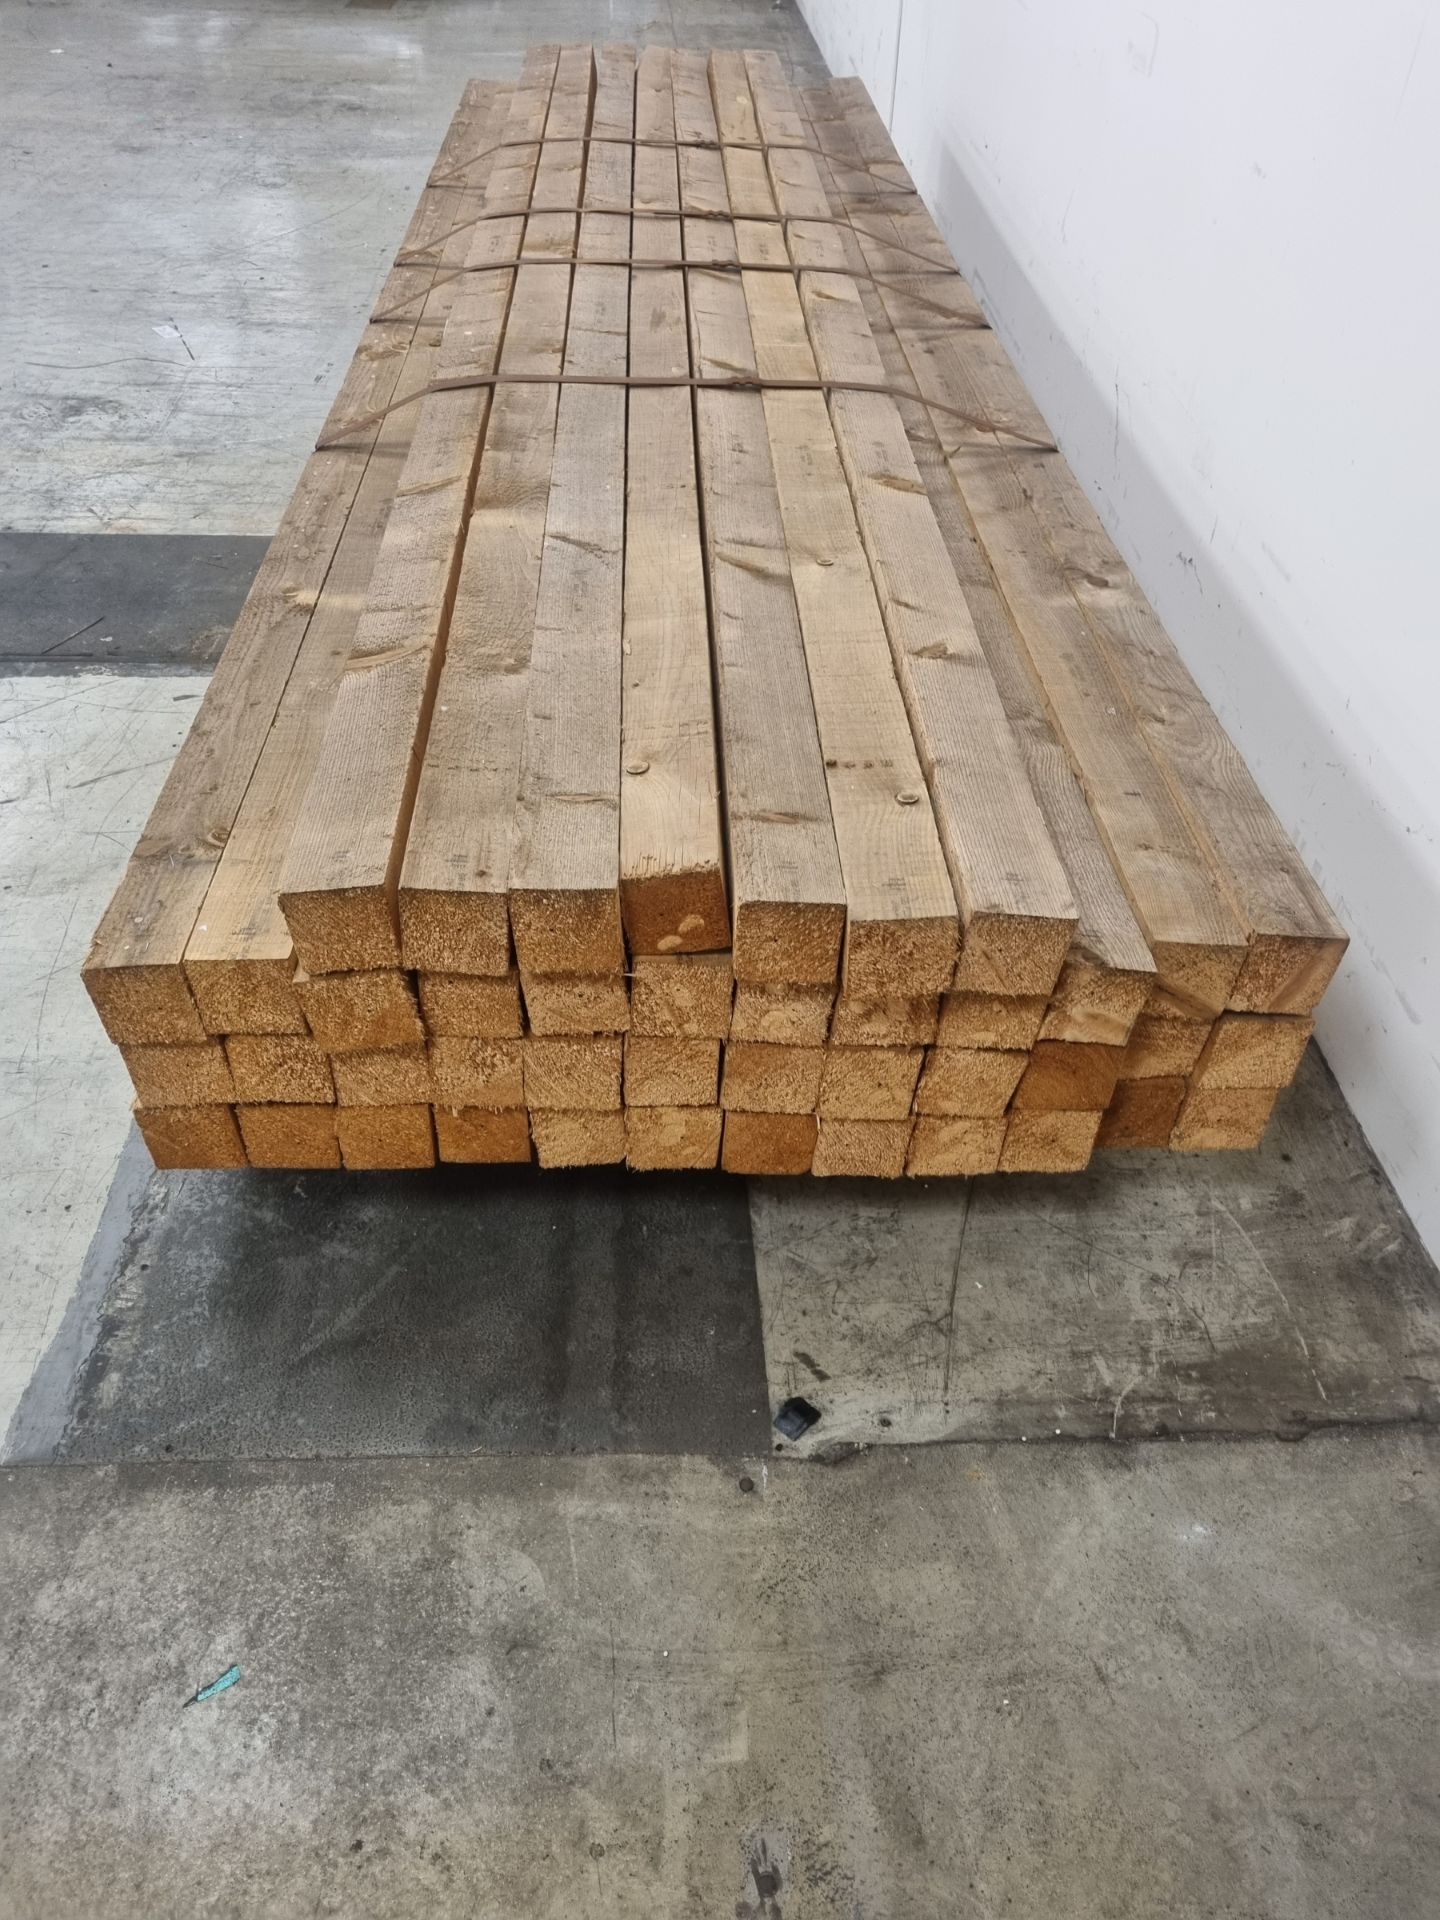 Pallet of 4"x4" (10x10cm) softwood, heat treated and debarked (GBFC-0452 DBHT) L420cm x 43 pcs - Image 3 of 5